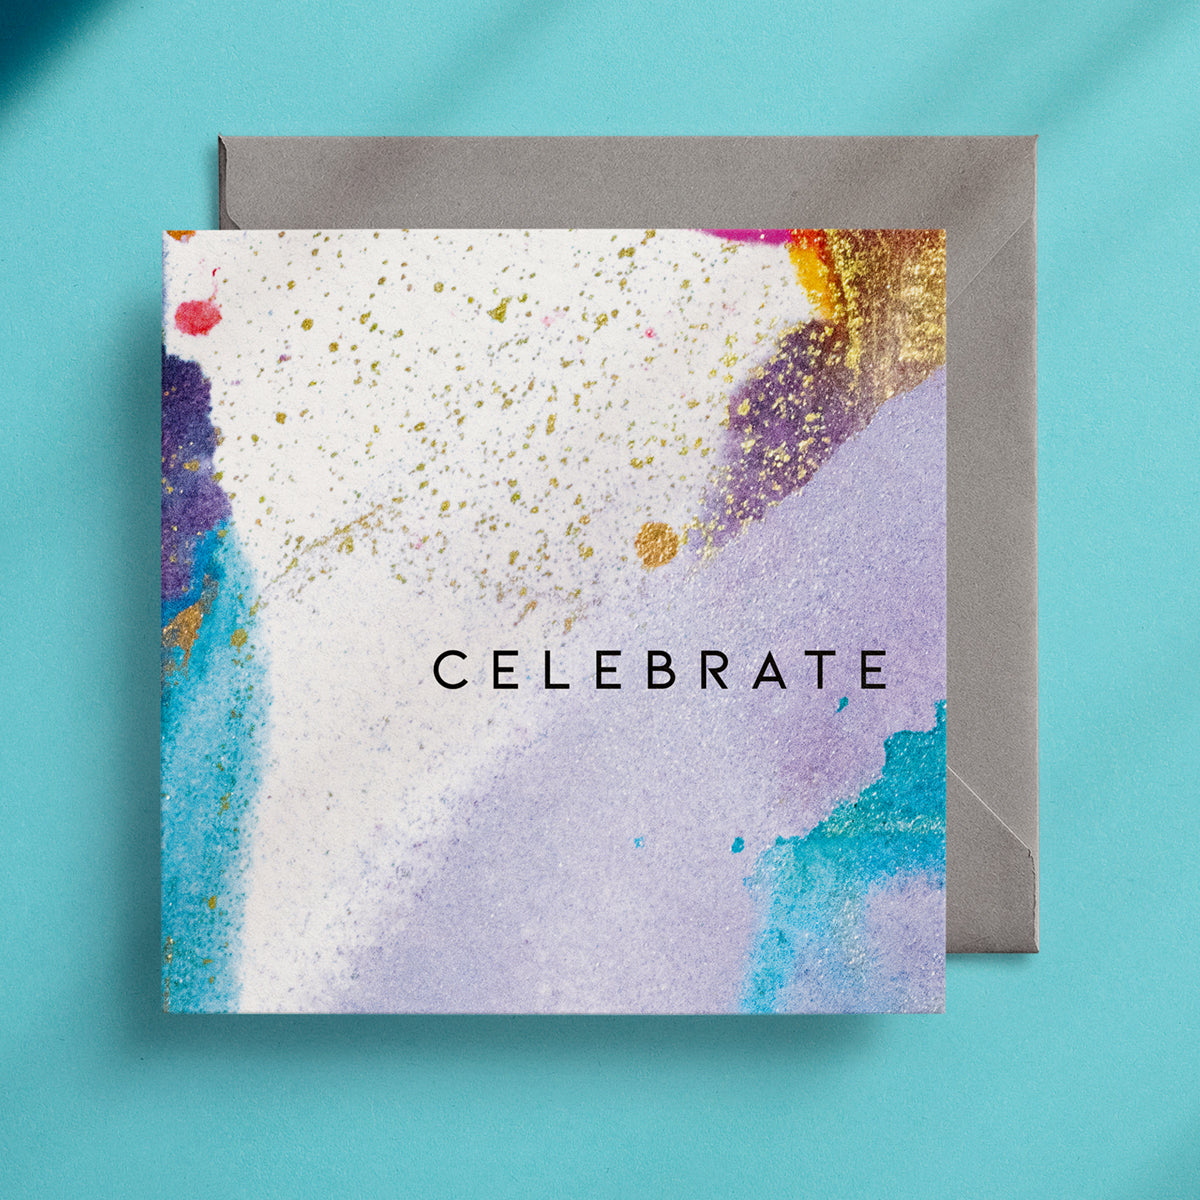 Celebrate - ABSTRACT Greeting Card